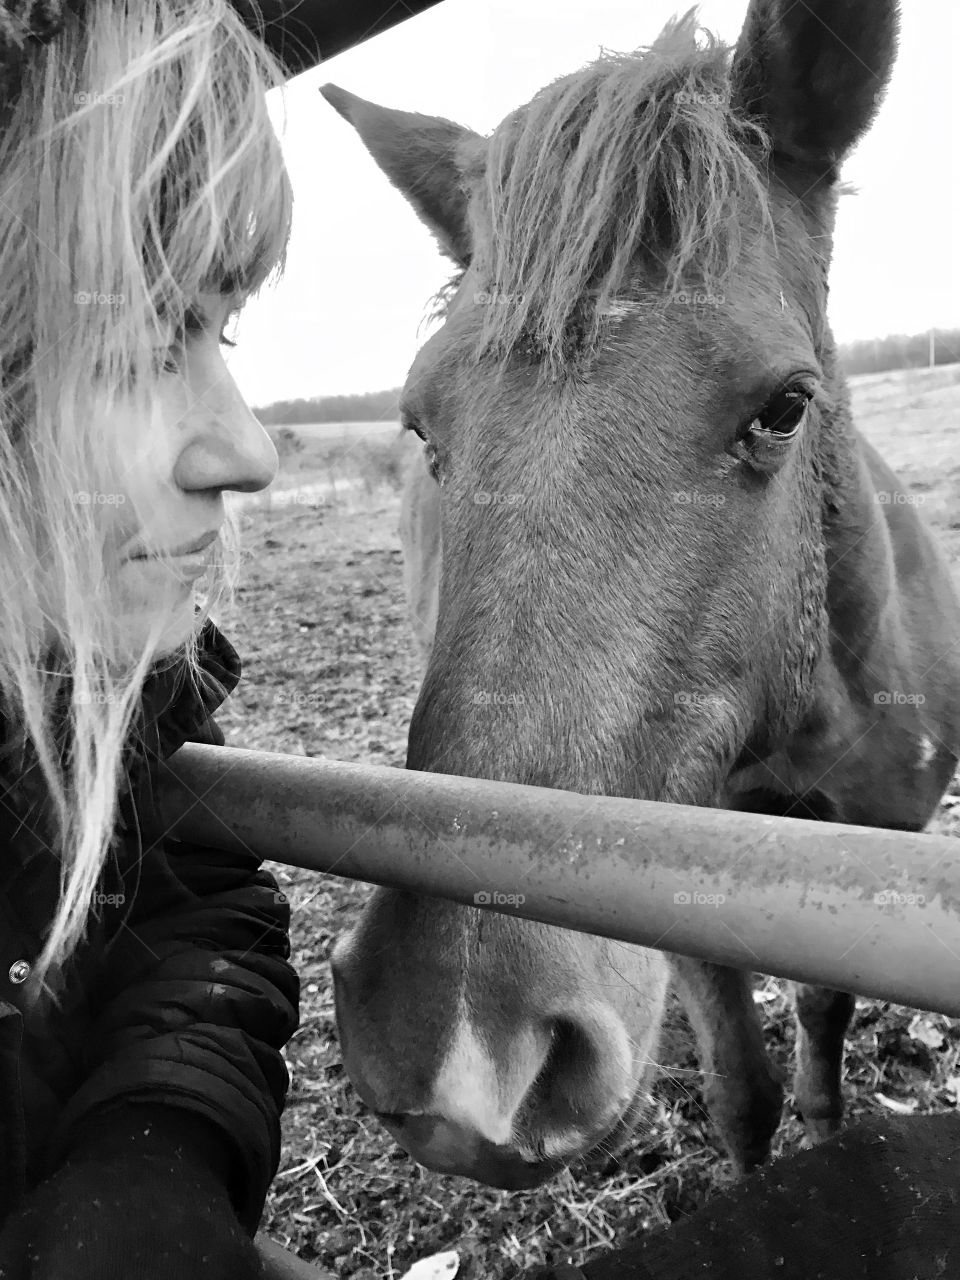 Winter stories, winter, stories, caring, horse, gate, woman, cold, hair, blond, windy, windy, rust, frozen, brown, grass, fur, eyes, ears, mammal, human, beautiful, profile, side view, day, daylight, overcast, gray, black and white